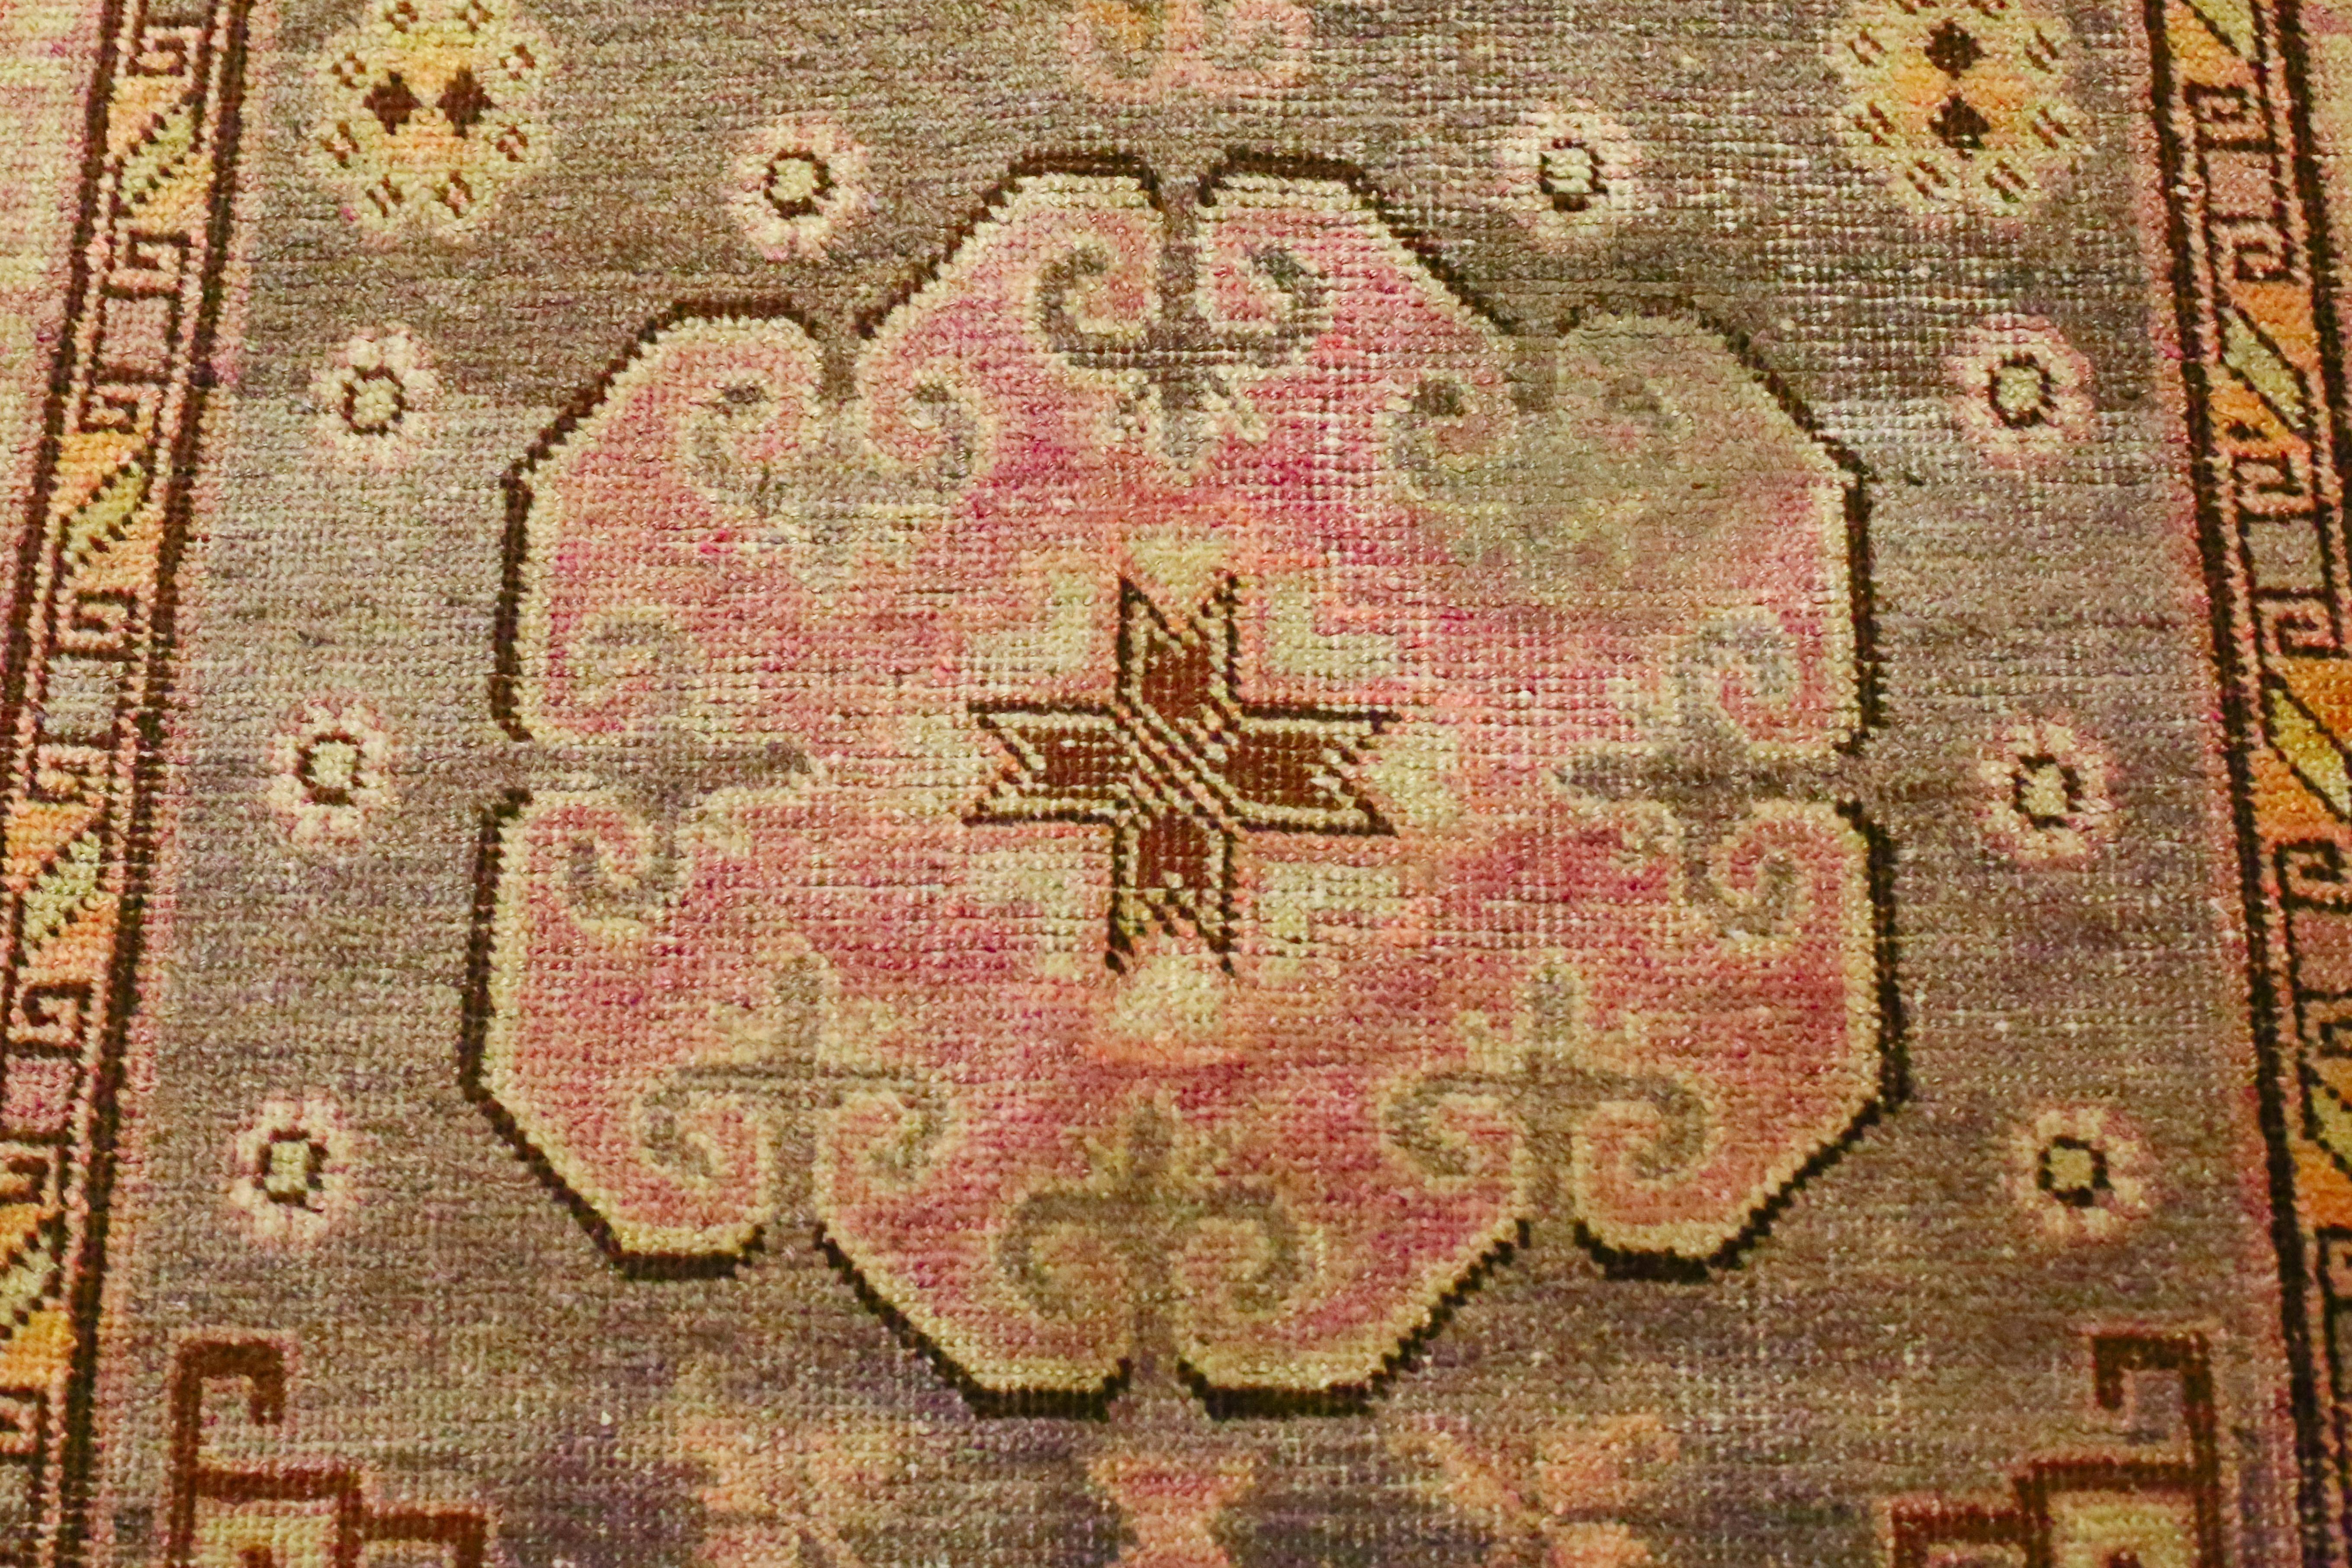 This is an antique Khotan rug from East Turkistan circa 1880s. Three cloud-like central medallions are set against a field of stylized floral forms. Multiple borders frames the field, each with different designs and symbols. Shades of pinks, olives,